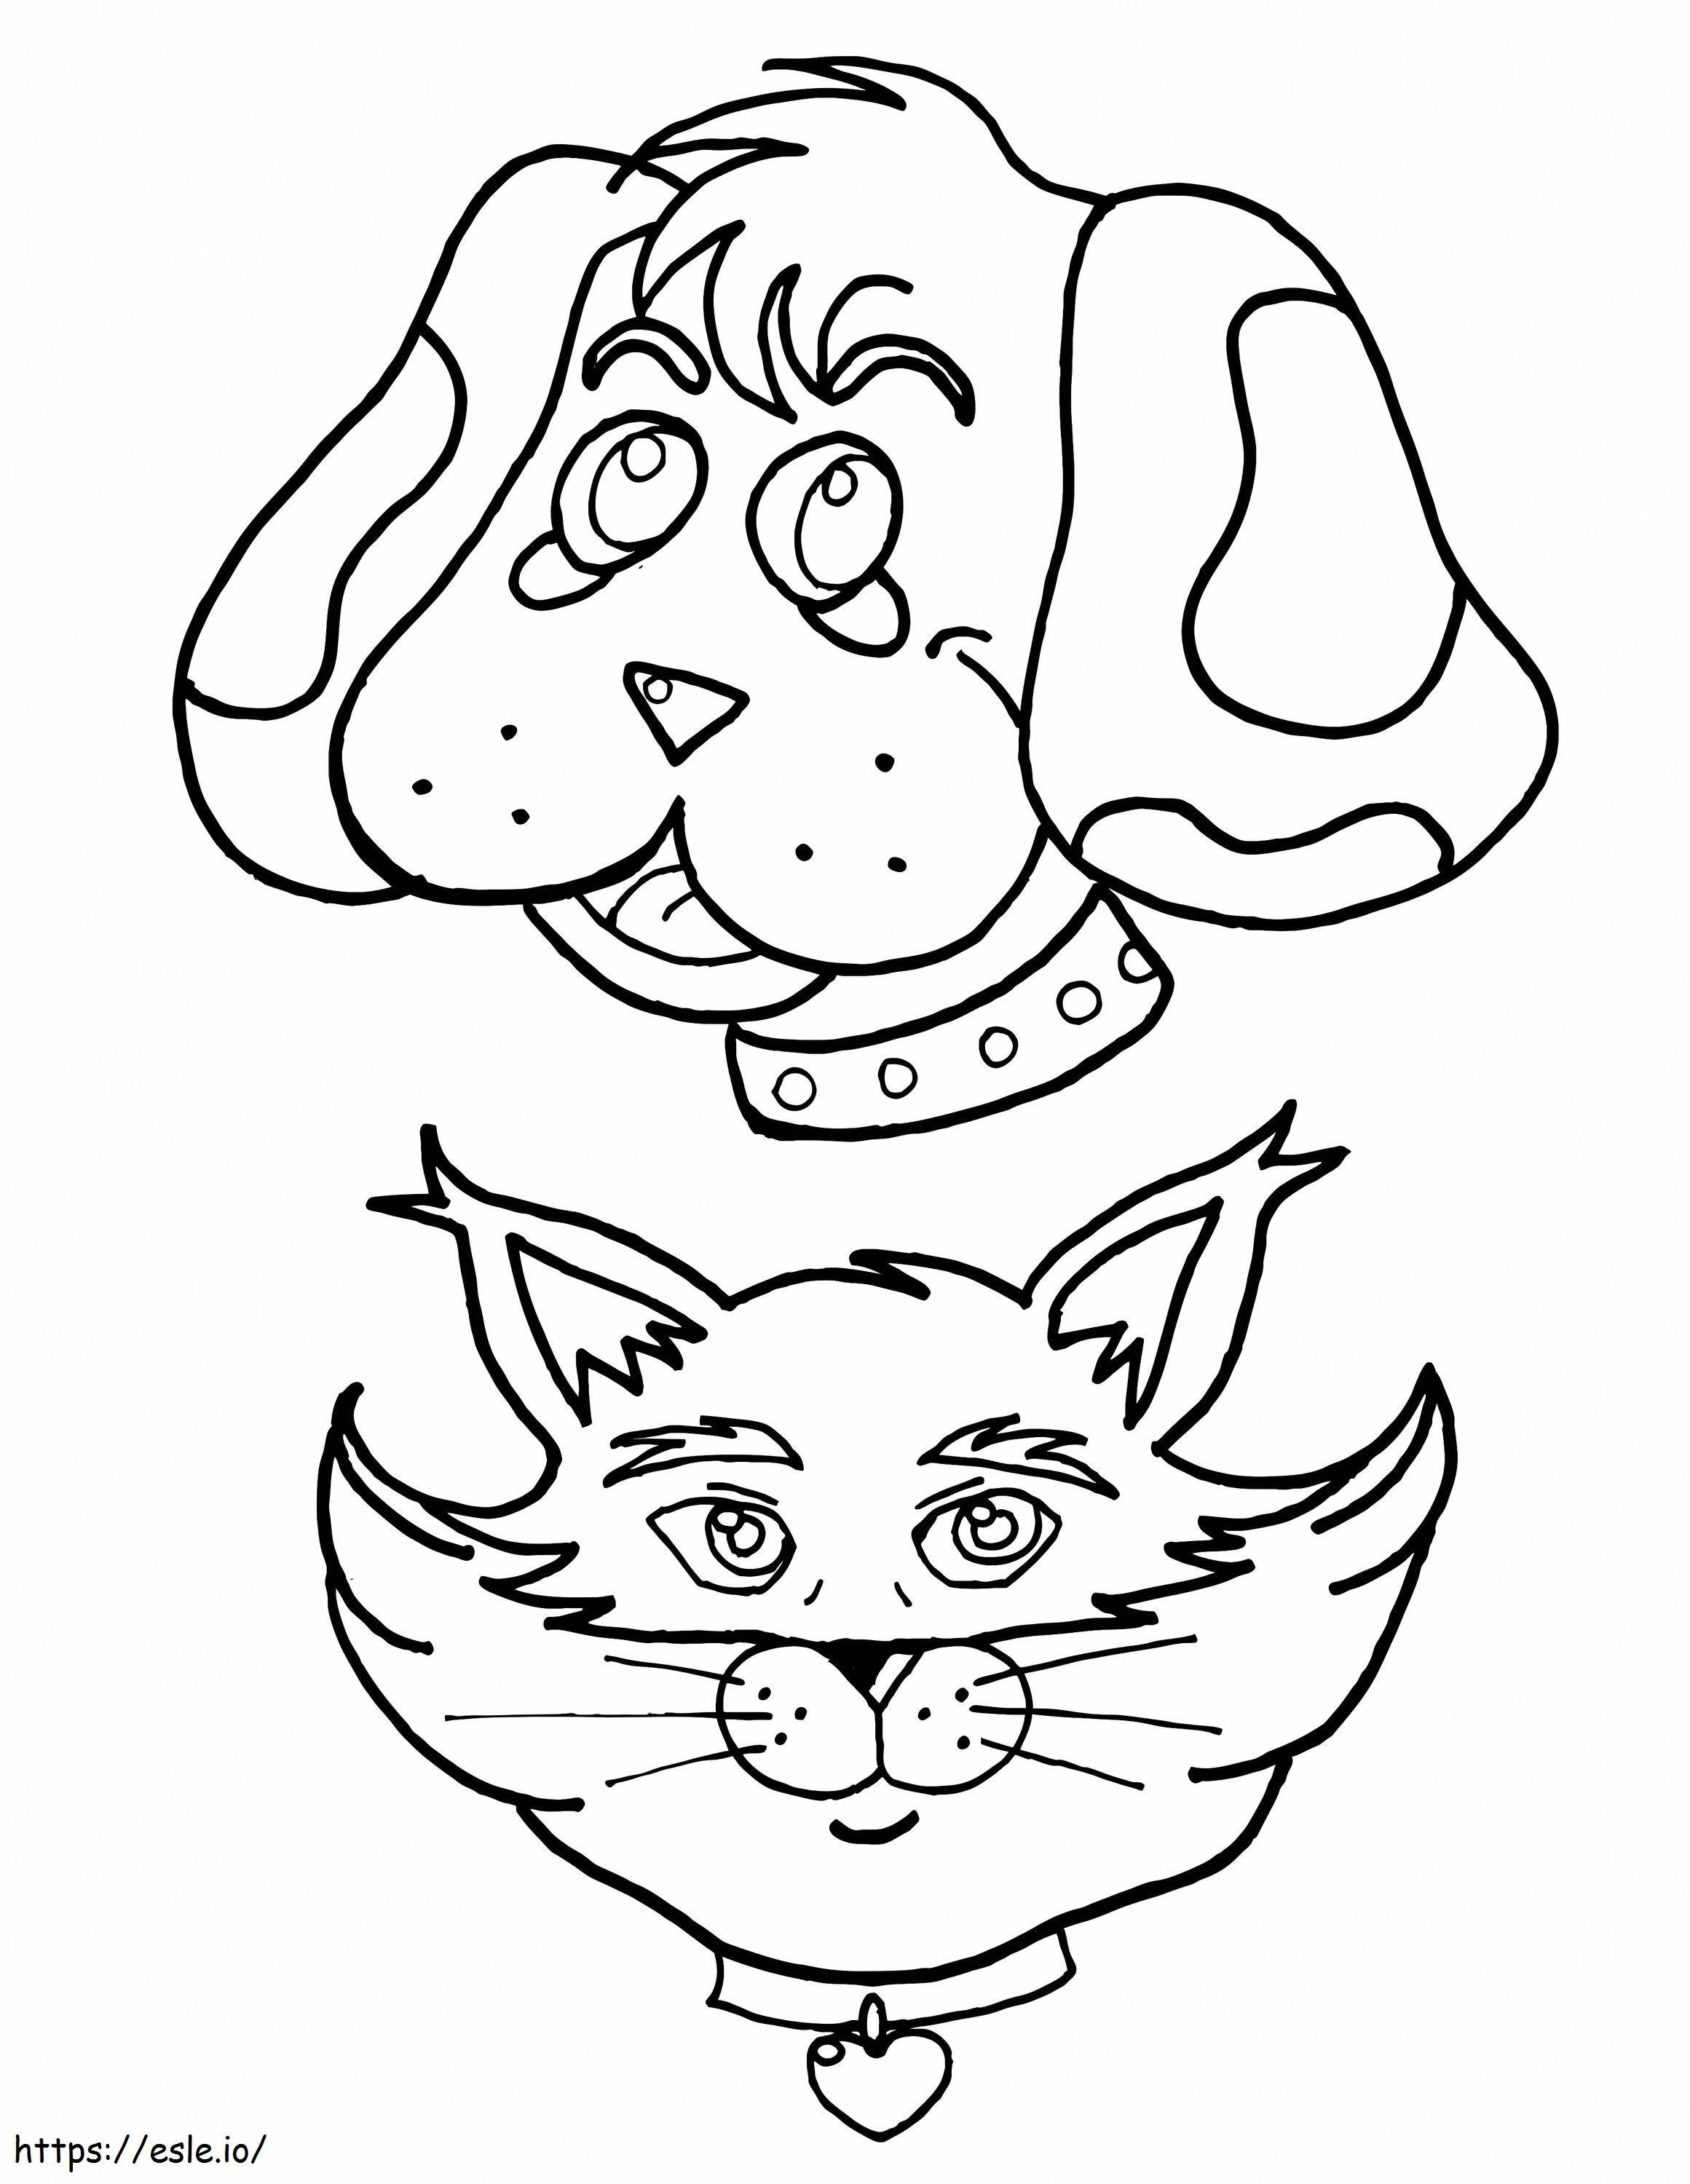 Dog And Cat Faces coloring page